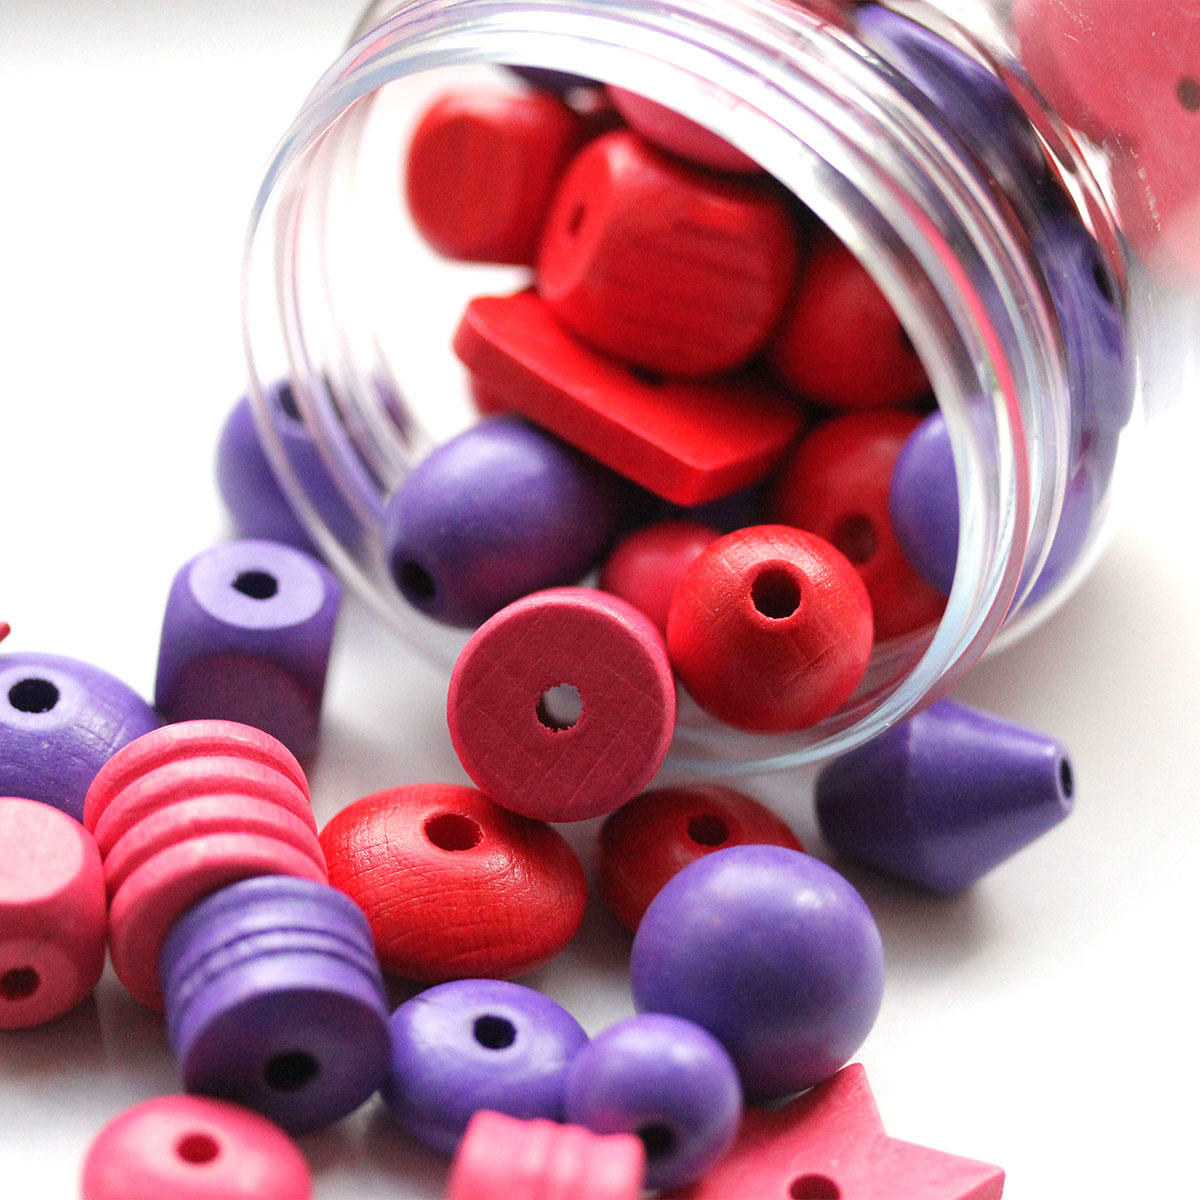 Purple & Red Tub of Wooden Beads